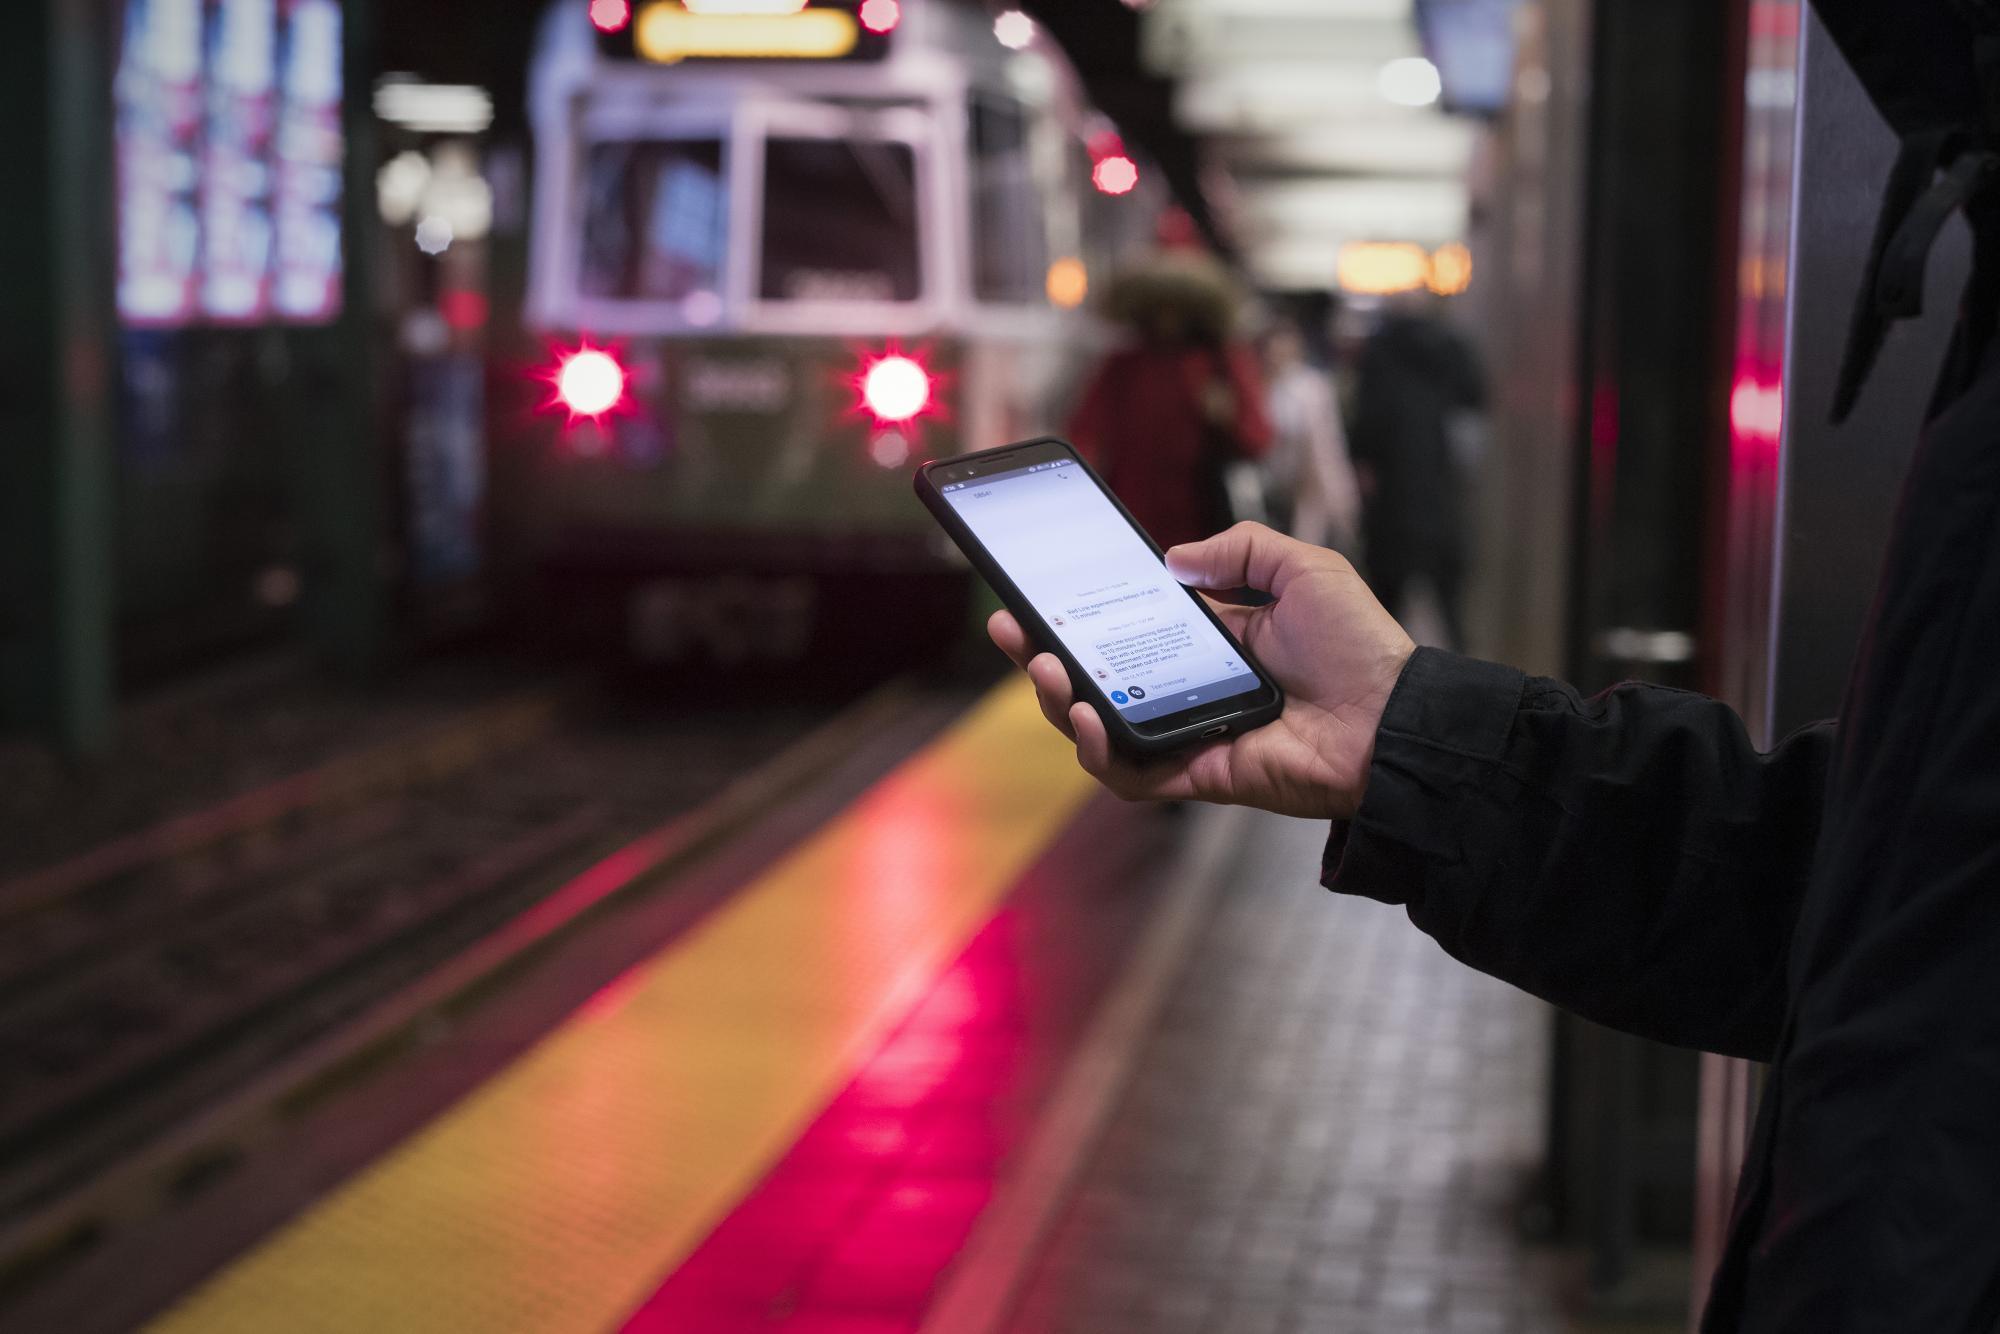 On the Green Line platform at Park Street, a rider holds a smartphone, looking at a T-Alerts text message.